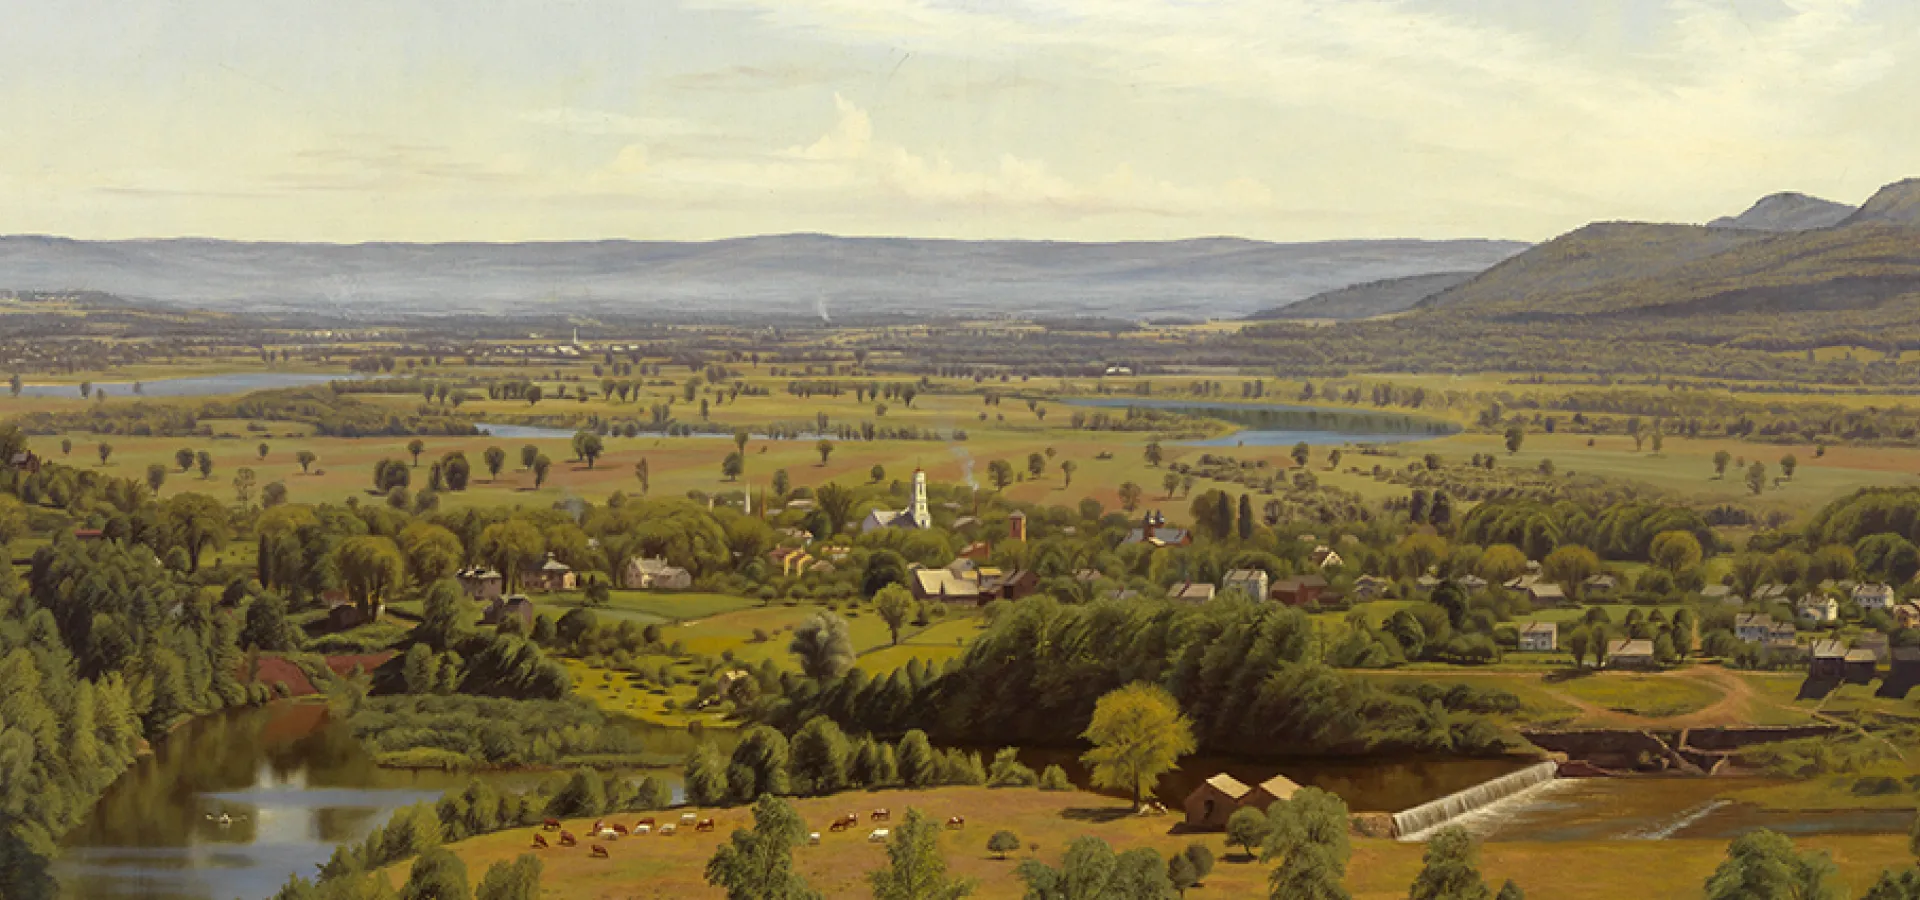 Painting by Thomas Charles Farrer. View of Northampton from the Dome of the Hospital, 1865 (detail). Oil on canvas.